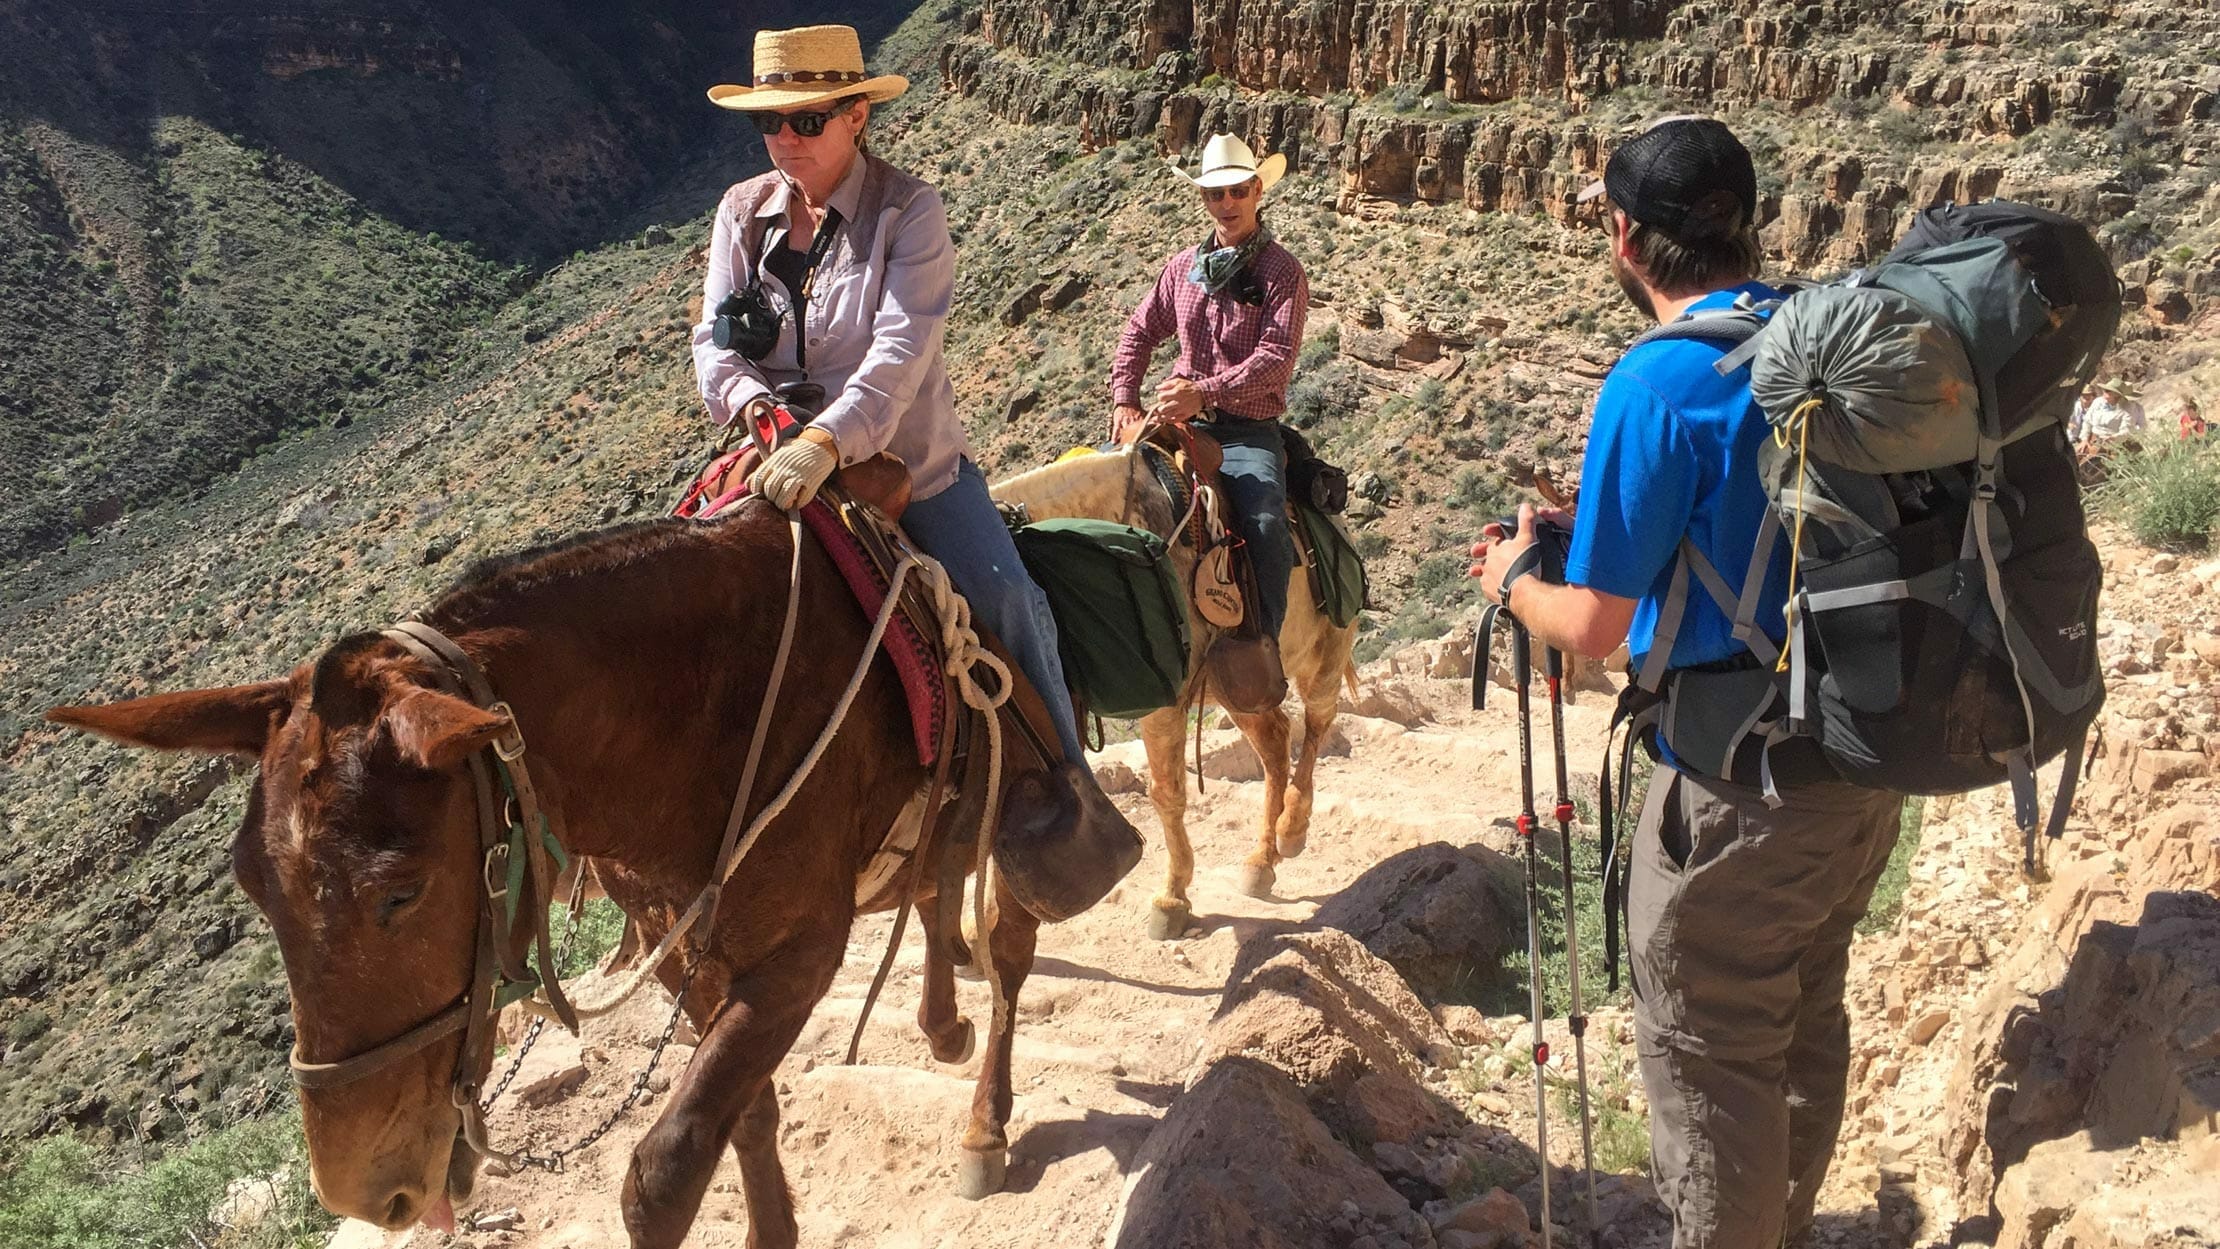 A backpacker moves to the side of the trail as two horses with riders pass by.